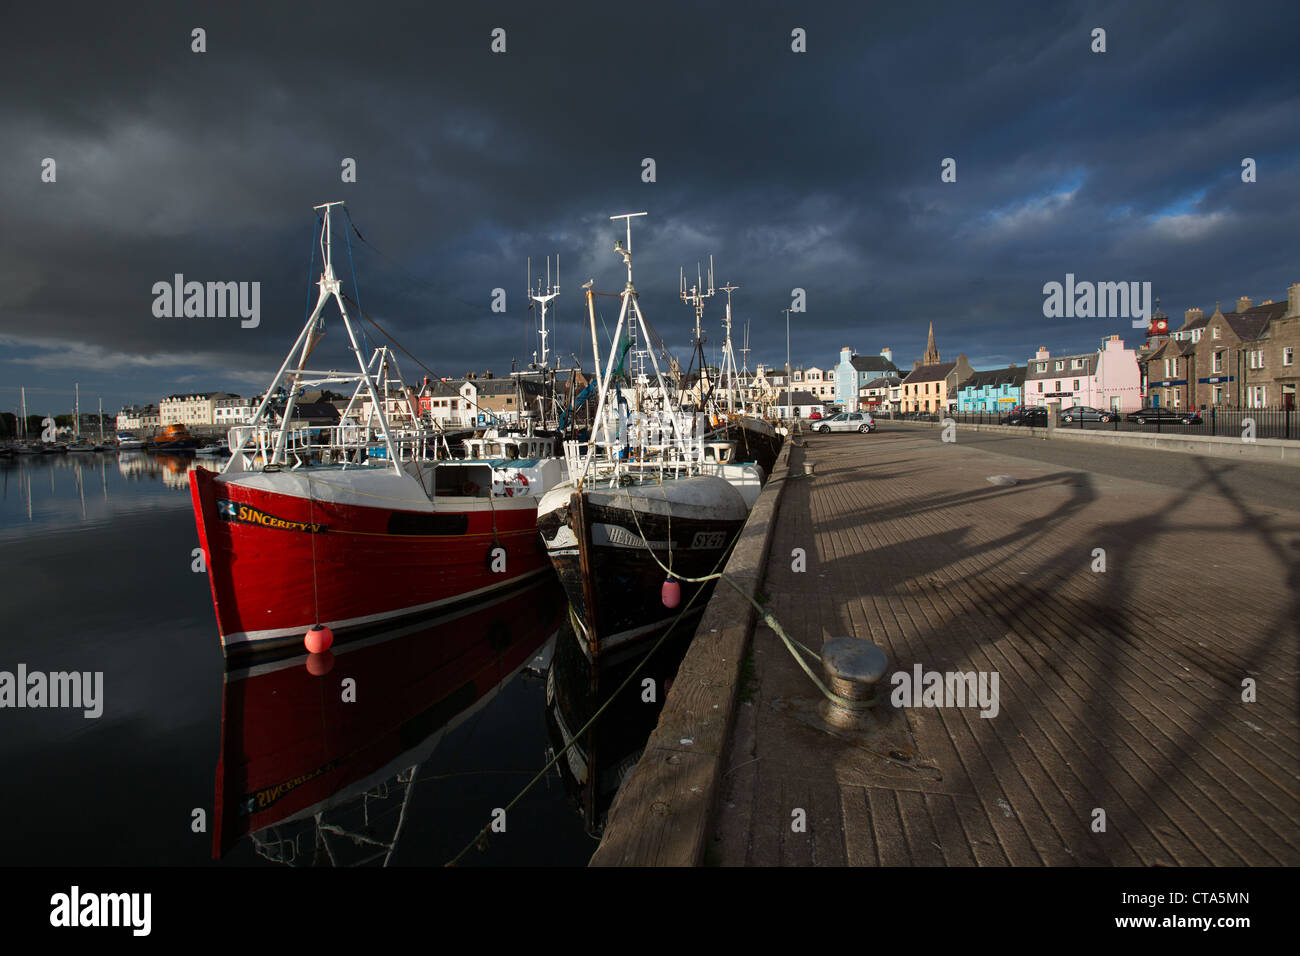 Town of Stornoway, Lewis. Picturesque evening view of the fishing fleet alongside Stornoway Harbour. Stock Photo